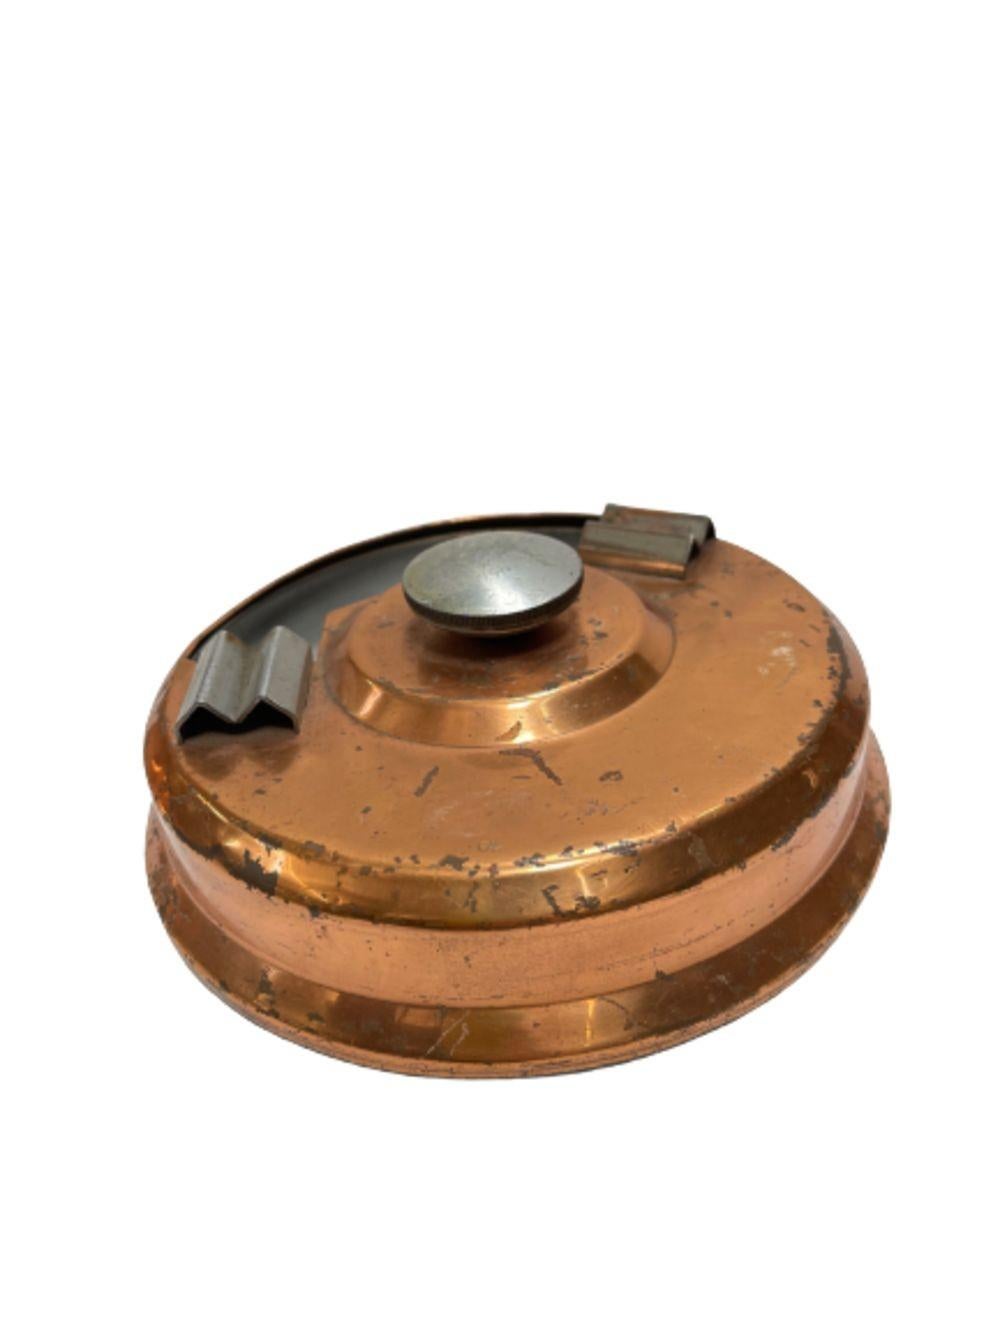 Machine Age Copper and Steel Smokeless Ashtray For Sale 1